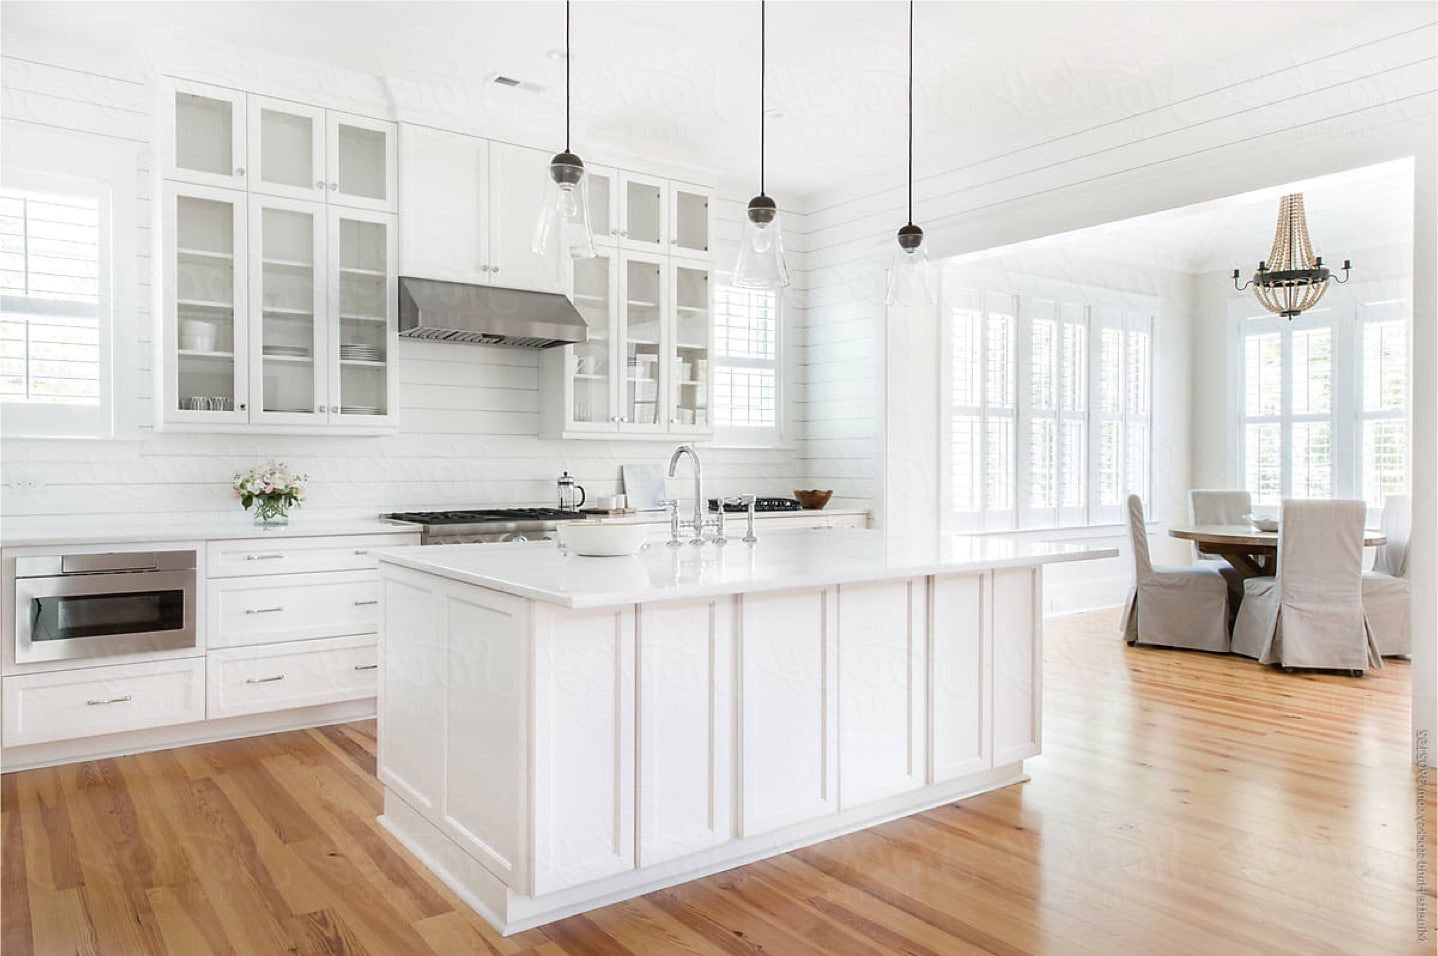 A modern, bright white kitchen with stainless steel appliances, white granite counter tops and bright, hardwood floor